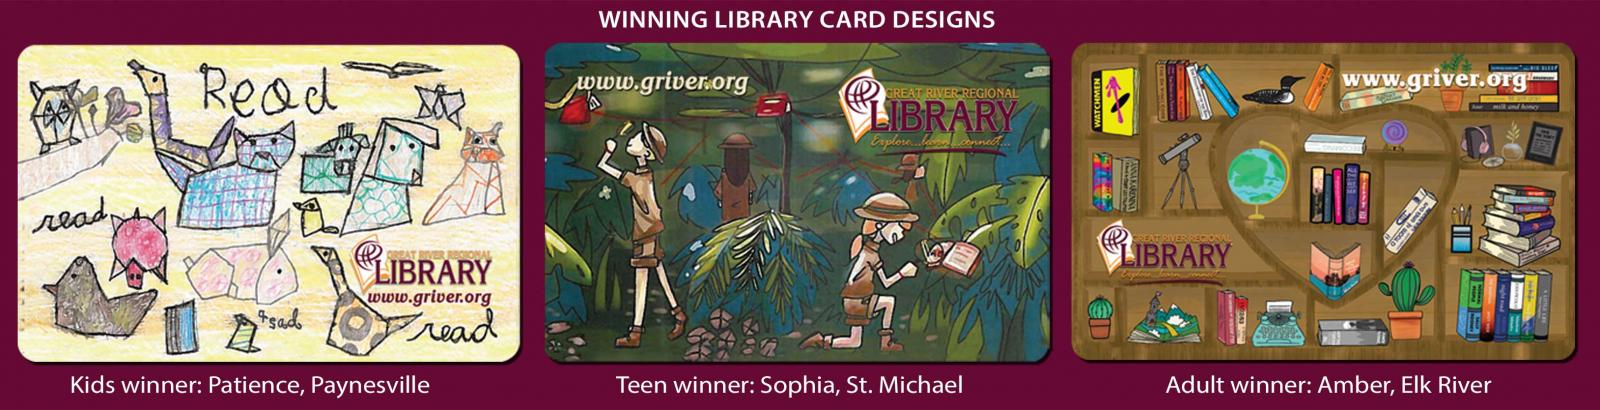 Three library card designs, first is origami animals, second is a jungle exploration, and third is a heart shaped book shelf